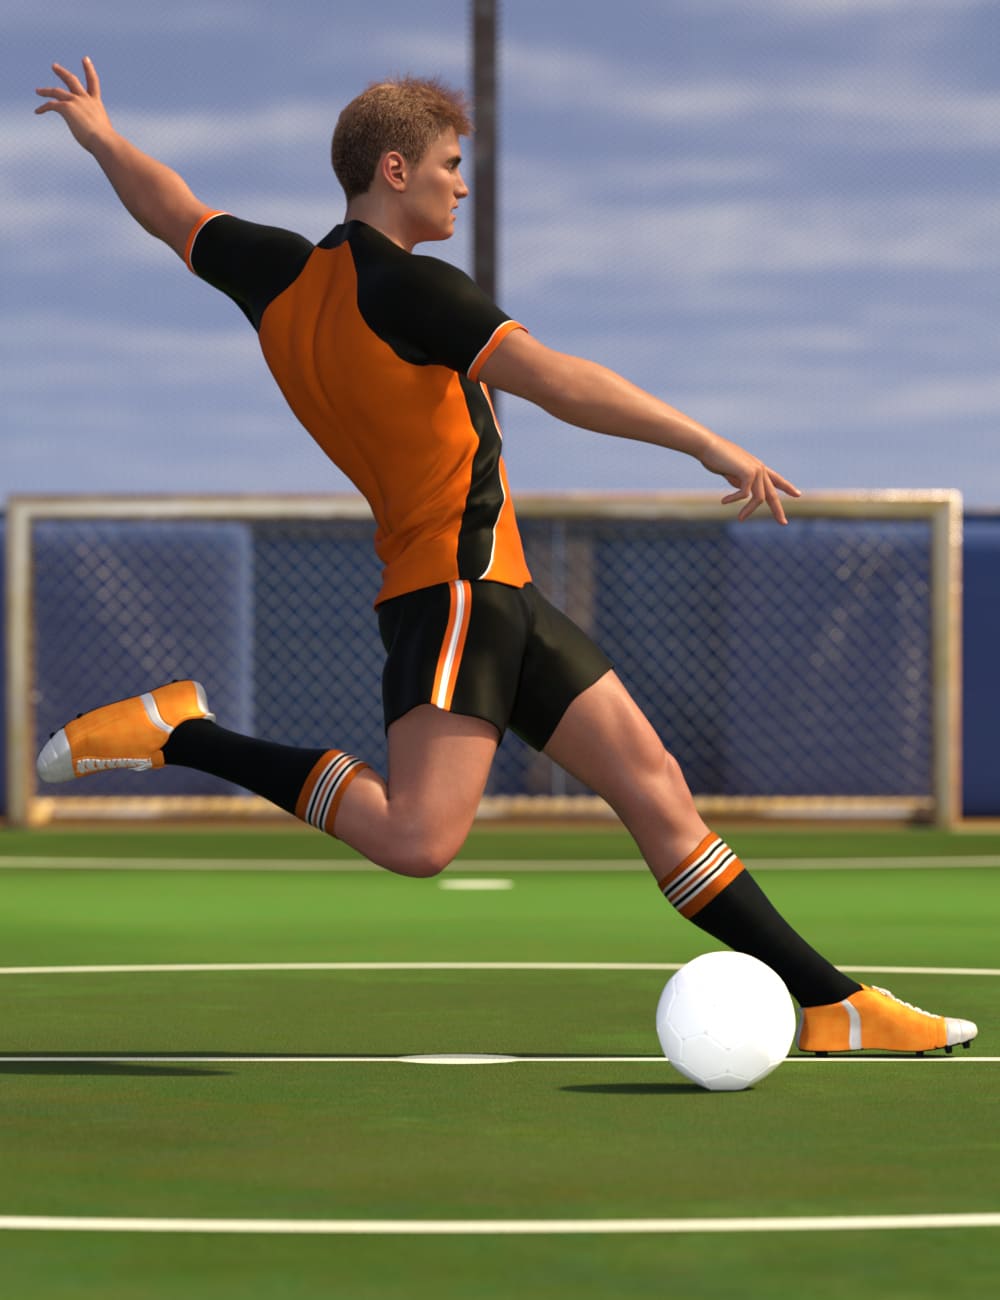 Soccer Poses for Genesis 8 and Genesis 8.1 Male_DAZ3D下载站